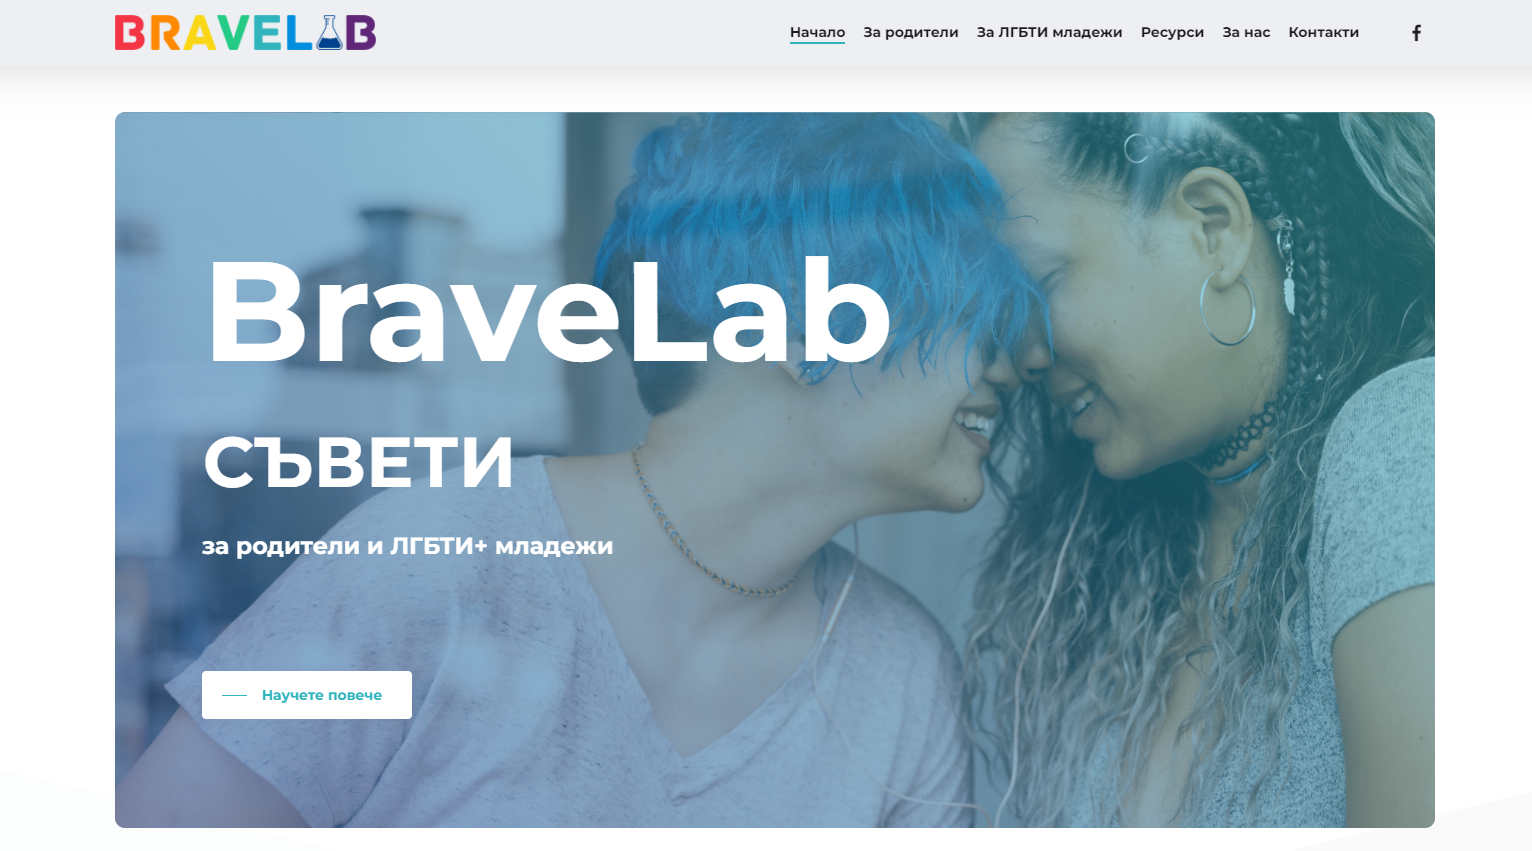 BraveLab launched – the first web portal for help and advice for LGBTI+ young people and their parents